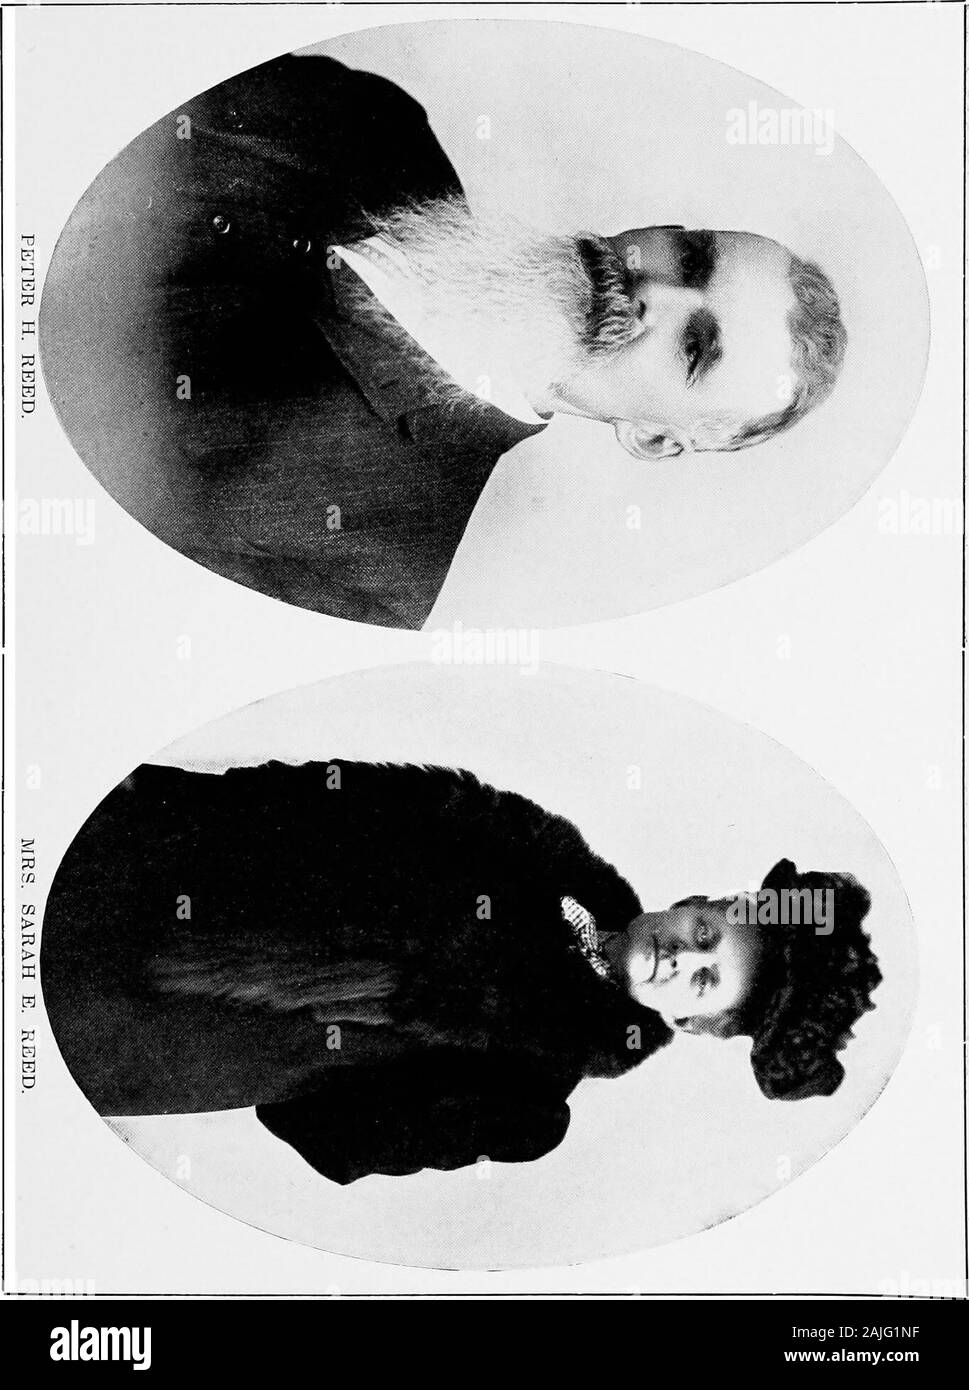 History of Nemaha County, Kansas . October 18, 1912, wasa physician at Soldier, Kans.; Mary Elizabeth, born December 29, 1856,and died April i, 1875; Mrs. Emma E. Cocherell, living in Jacksoncounty, born December 17, 1859; John L., born August 2, 1862, anddied December 26, 1863. Peter H. Reed was born in Gallatin county, Kentucky, March 26,1849, ^d was reared on a Kentucky farm. When but fifteen years ofage (1864) he enlisted in Company B, Fifty-fifth Kentucky infantry,and served until the close of the war. After his war service expired heremained at home and took care of his brothers and sist Stock Photo